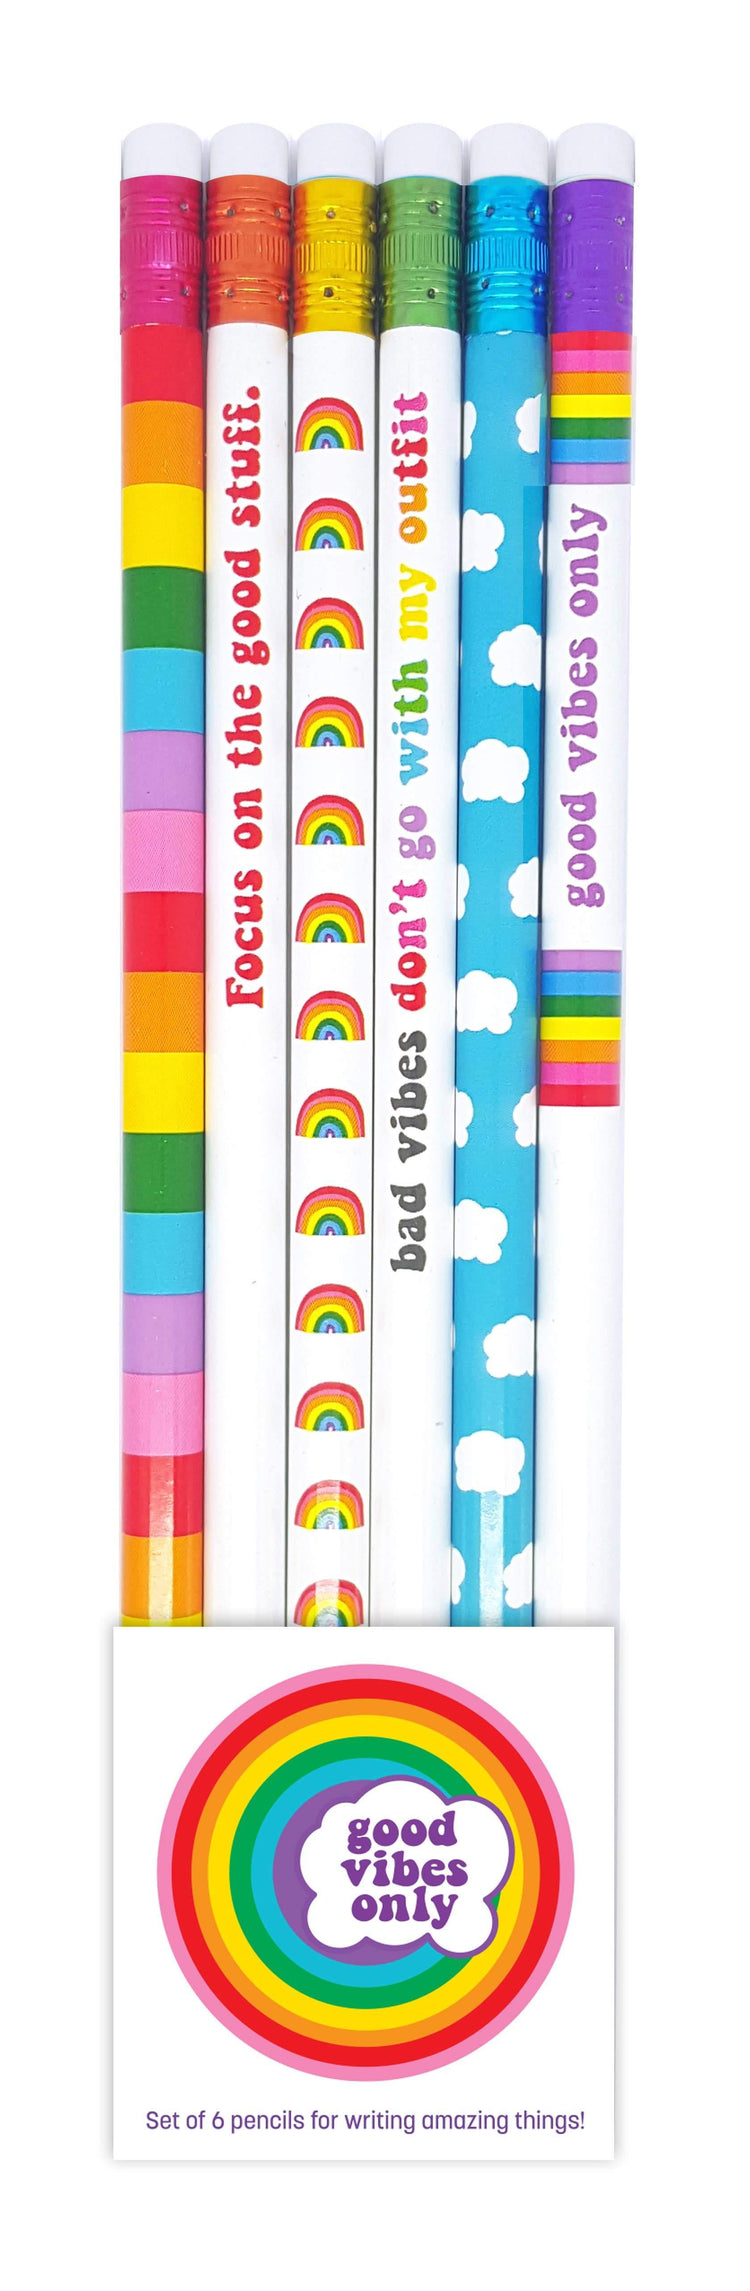 Good Vibes Only Pencil Set - Common Dear